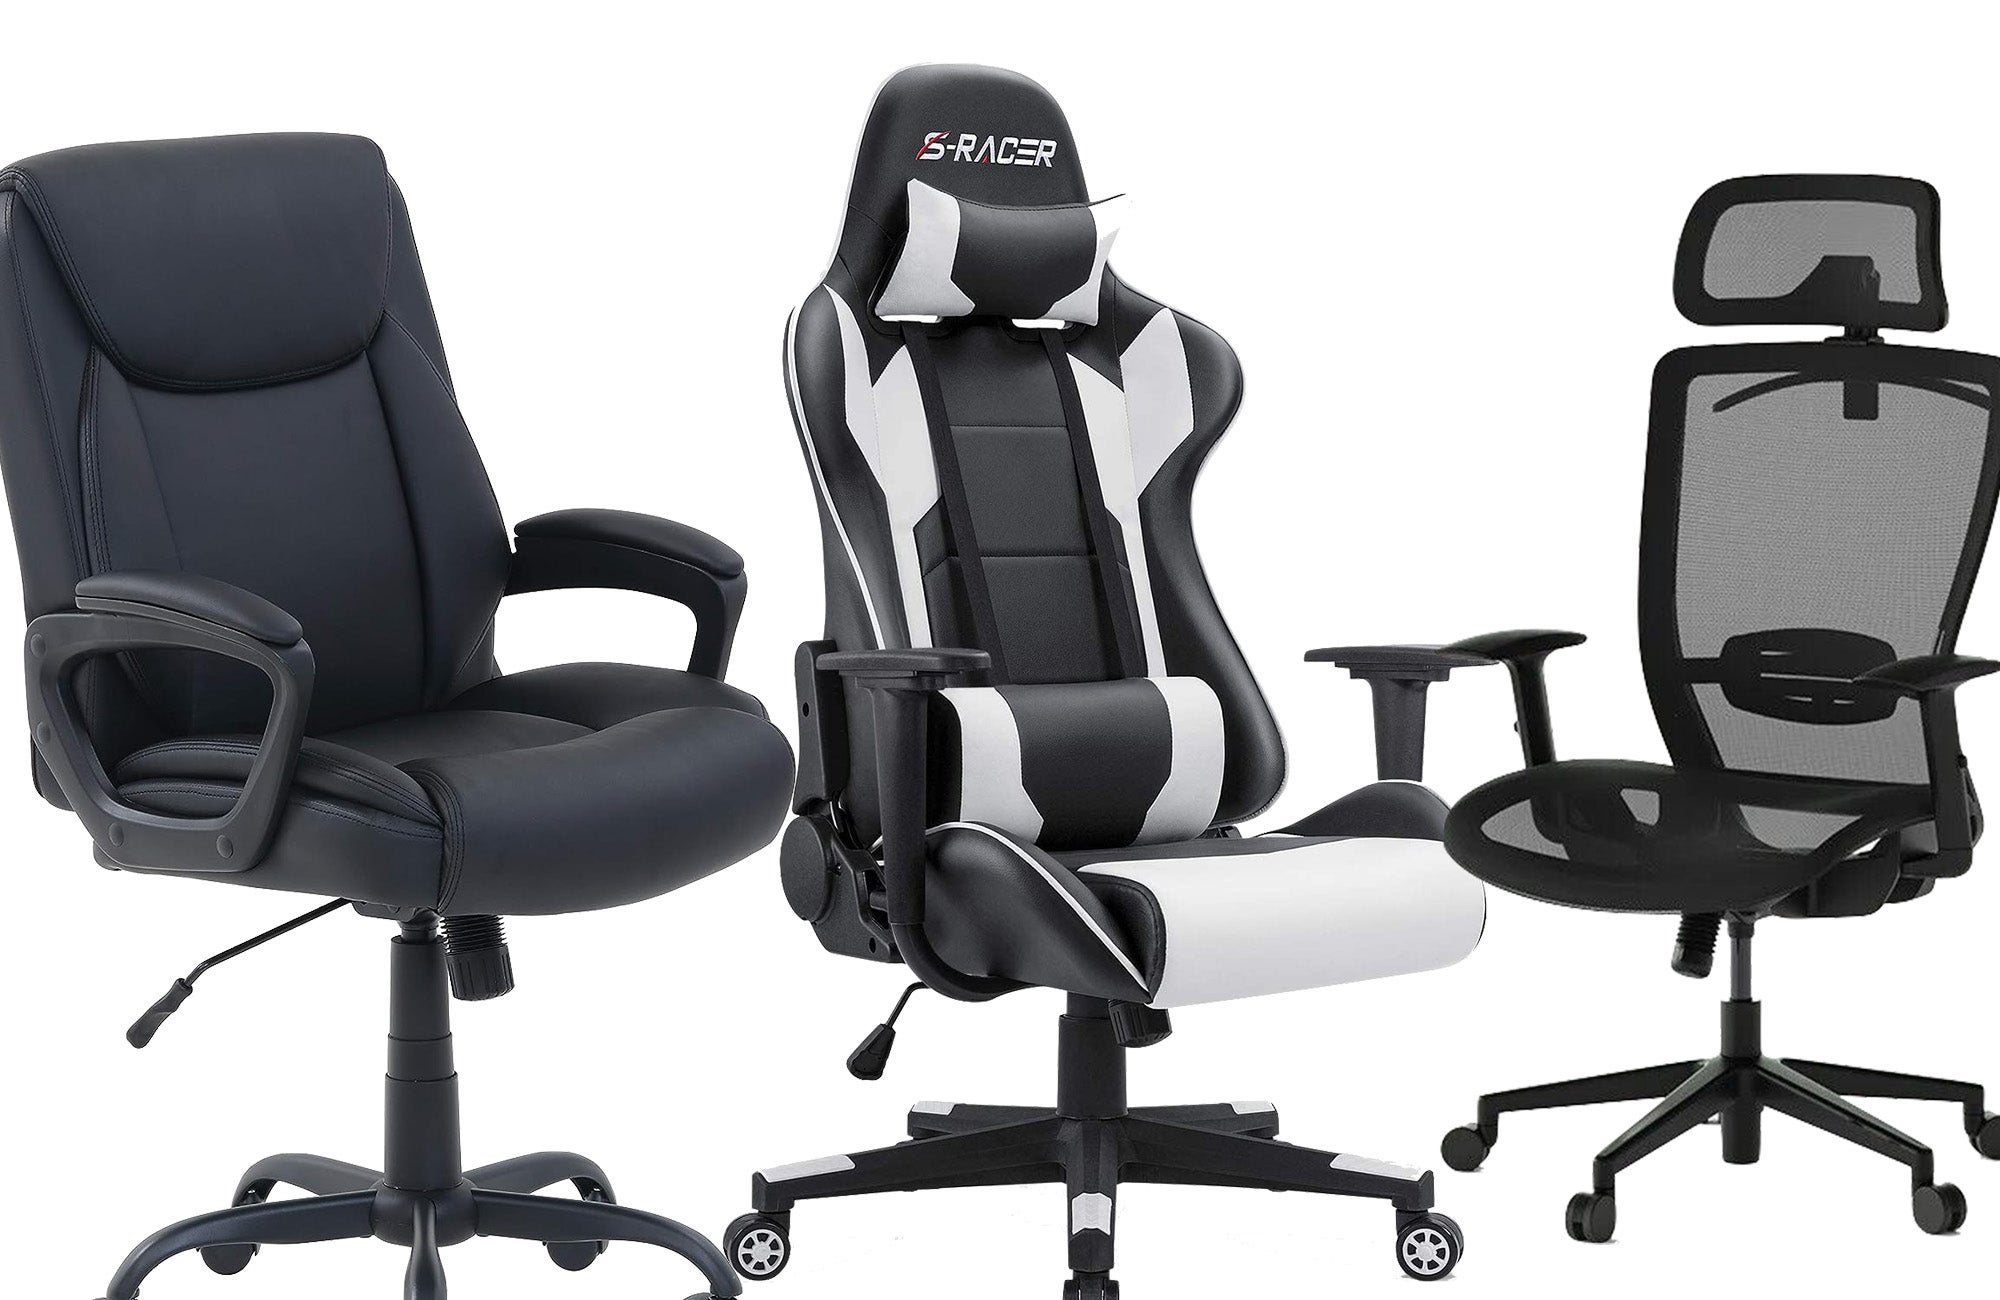 The best cheap desk chairs to support your back